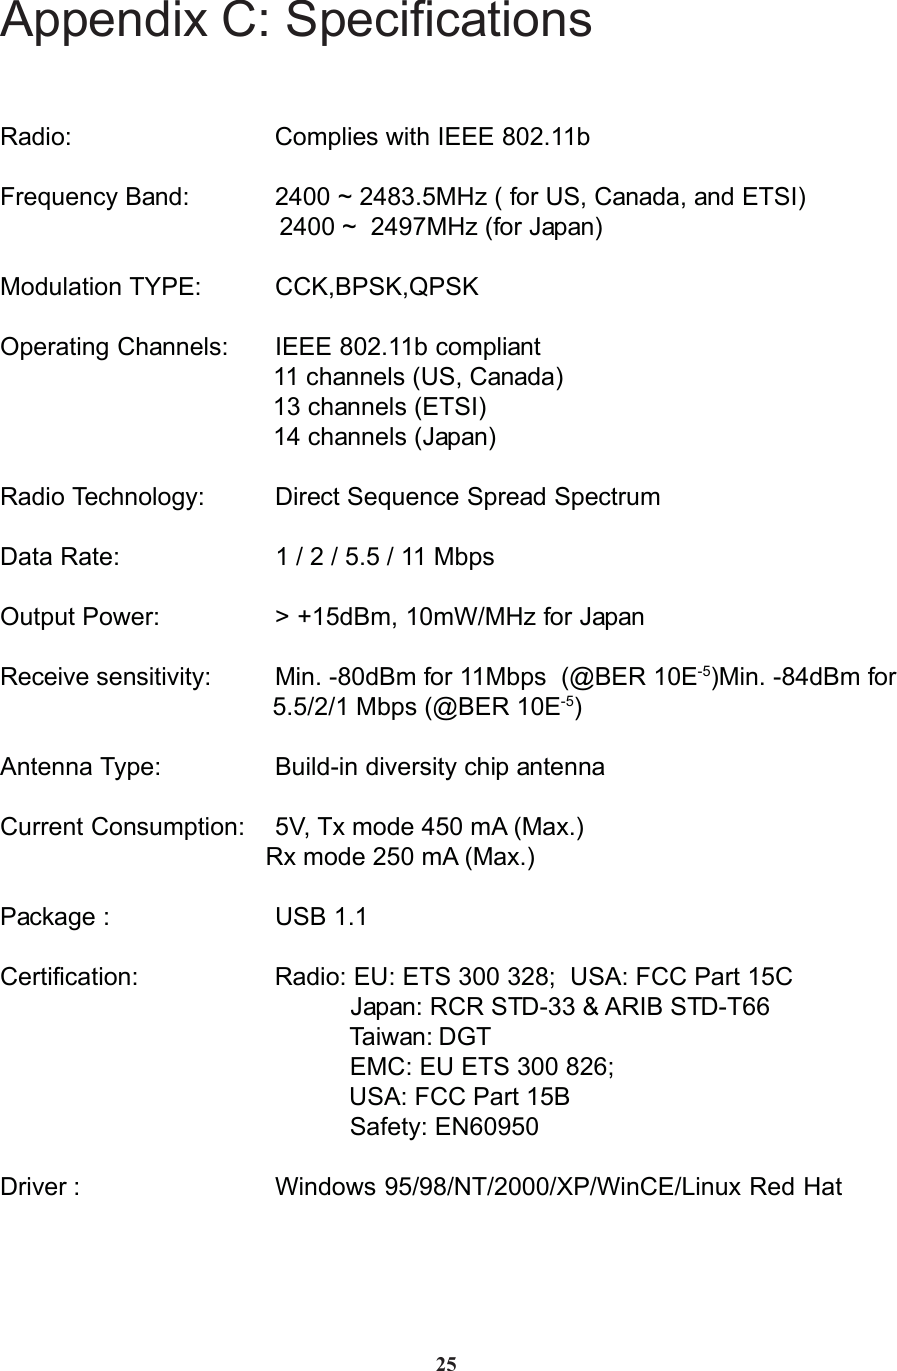 Appendix C: SpecificationsRadio: Complies with IEEE 802.11bFrequency Band: 2400 ~ 2483.5MHz ( for US, Canada, and ETSI)                                        2400 ~  2497MHz (for Japan)Modulation TYPE: CCK,BPSK,QPSKOperating Channels: IEEE 802.11b compliant                                       11 channels (US, Canada)                                       13 channels (ETSI)                                       14 channels (Japan)Radio Technology: Direct Sequence Spread SpectrumData Rate: 1 / 2 / 5.5 / 11 MbpsOutput Power: &gt; +15dBm, 10mW/MHz for JapanReceive sensitivity: Min. -80dBm for 11Mbps  (@BER 10E-5)Min. -84dBm for                                       5.5/2/1 Mbps (@BER 10E-5)Antenna Type: Build-in diversity chip antennaCurrent Consumption: 5V, Tx mode 450 mA (Max.)                                      Rx mode 250 mA (Max.)Package : USB 1.1Certification: Radio: EU: ETS 300 328;  USA: FCC Part 15C                                                  Japan: RCR STD-33 &amp; ARIB STD-T66                                                  Taiwan: DGT                                                  EMC: EU ETS 300 826;                                                  USA: FCC Part 15B                                                  Safety: EN60950Driver : Windows 95/98/NT/2000/XP/WinCE/Linux Red Hat25